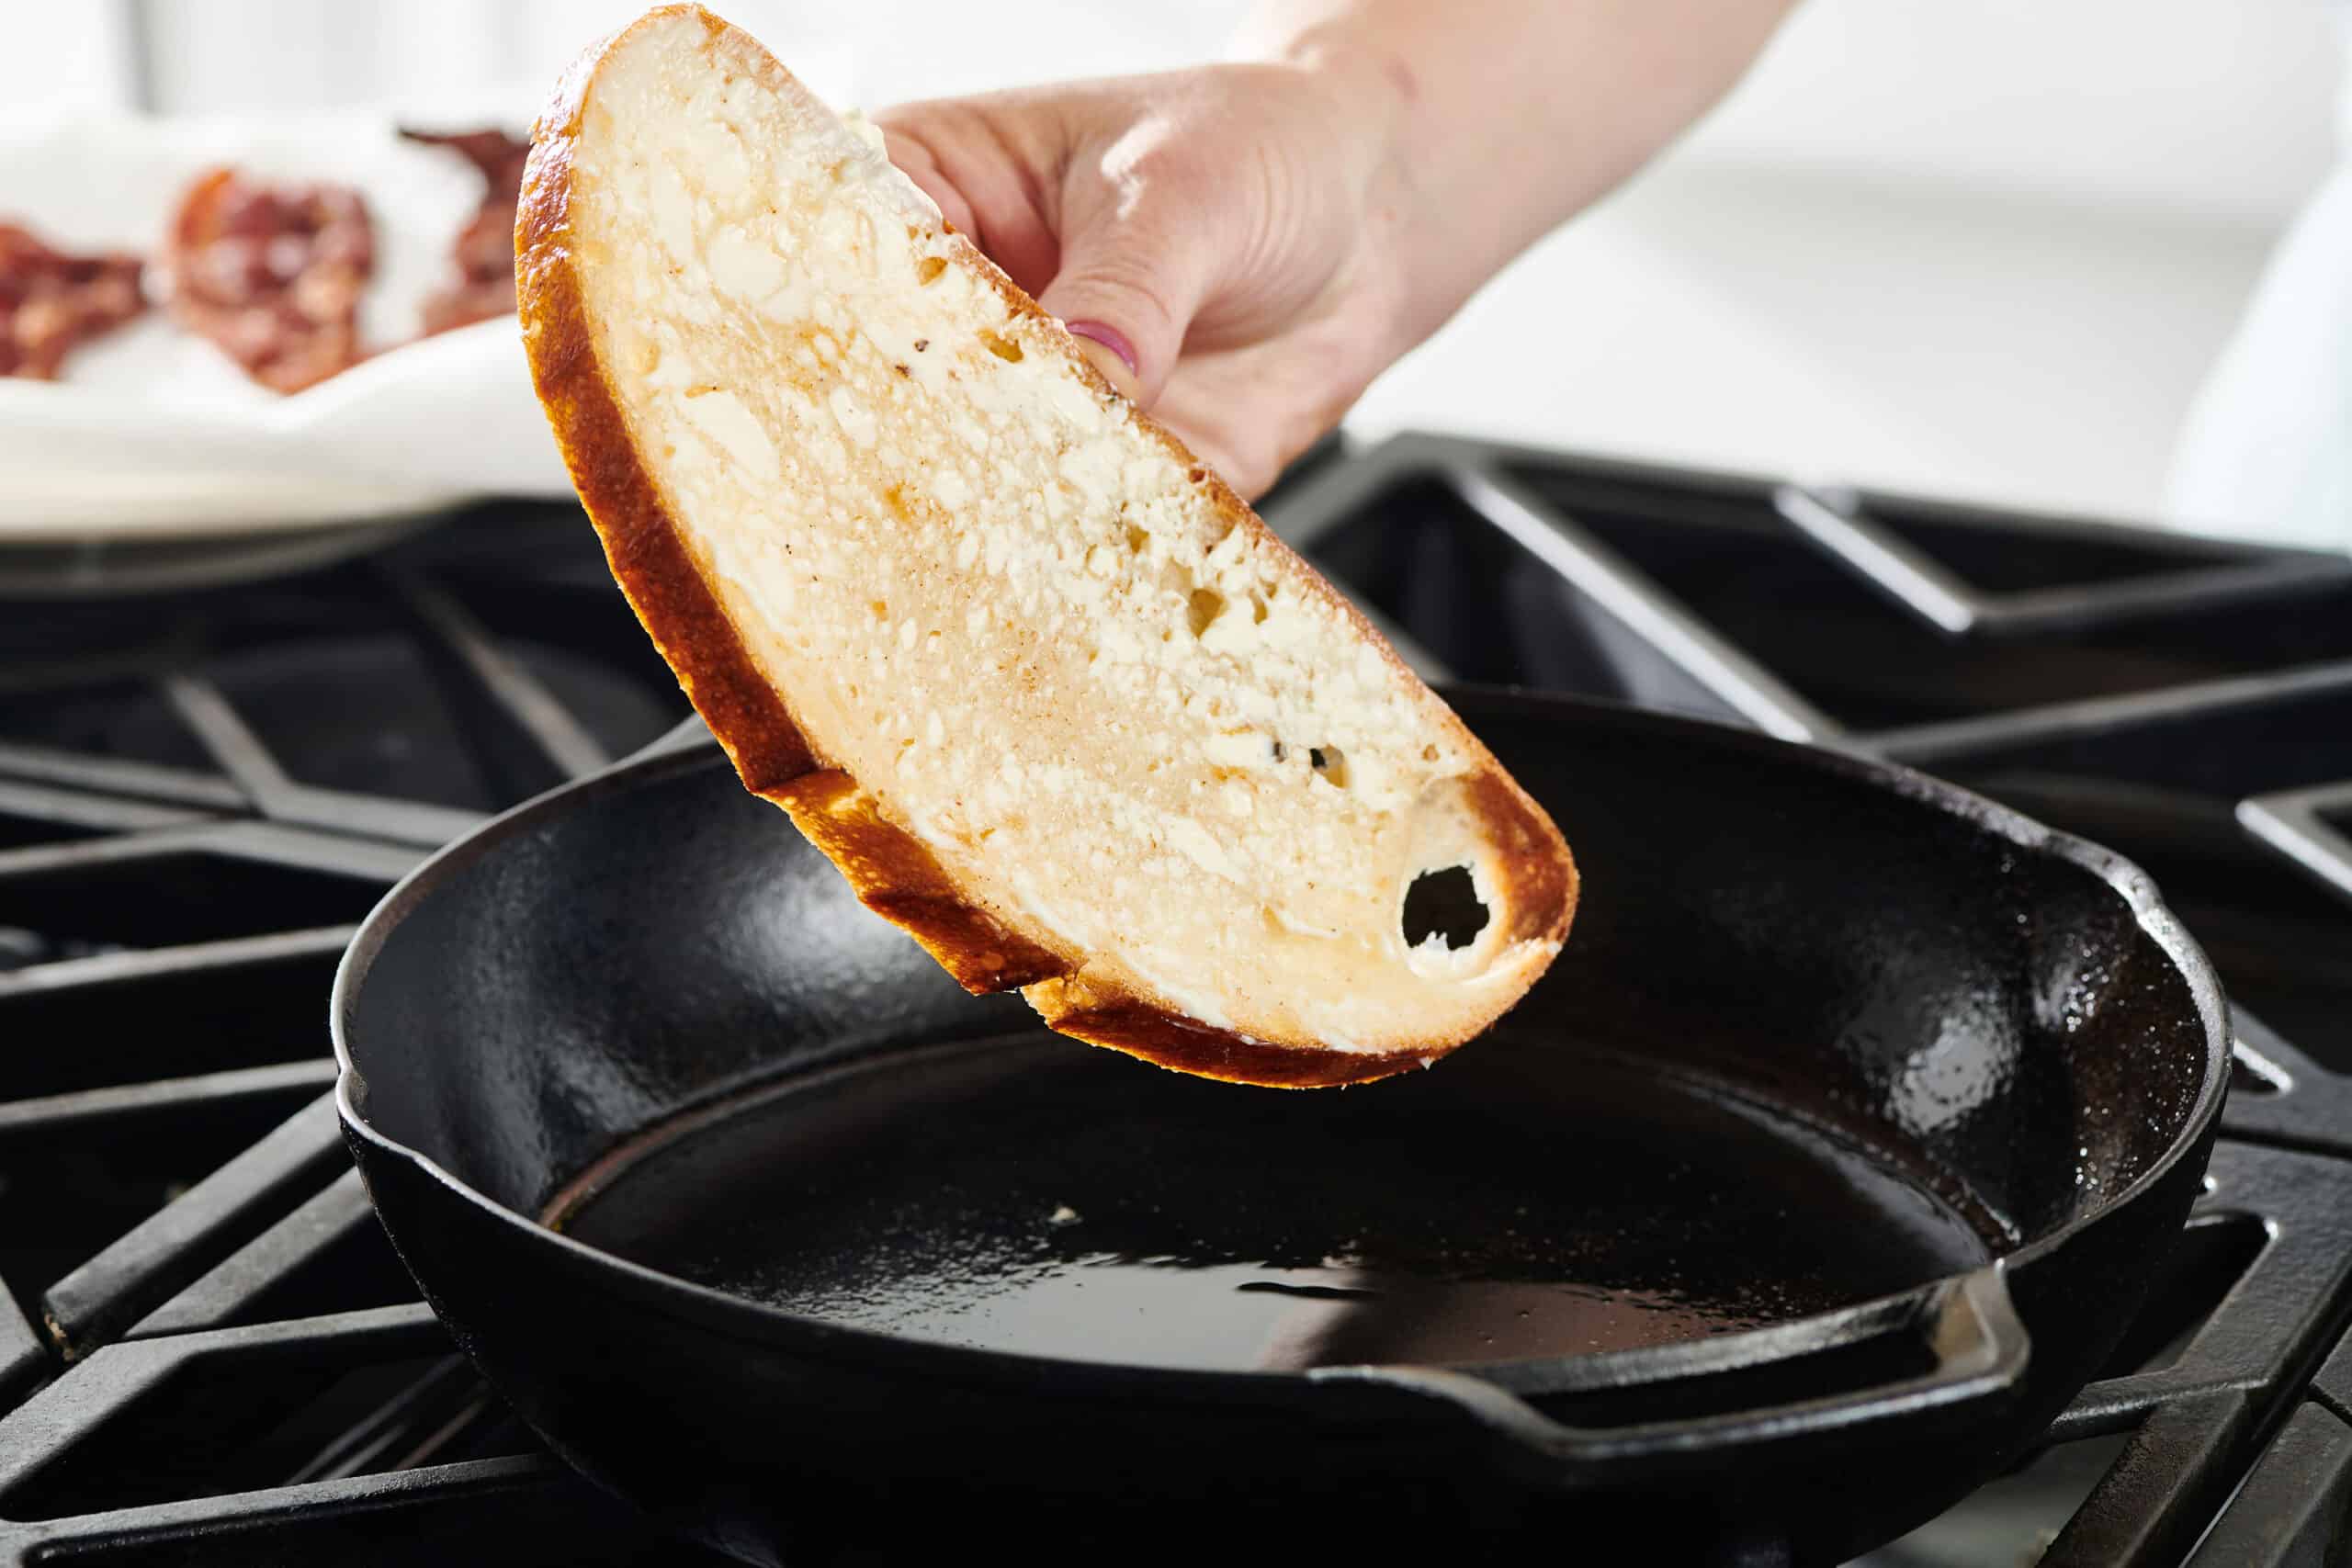 A woman's hand placing a slice of bread spread with mayonnaise in a skillet on the stove